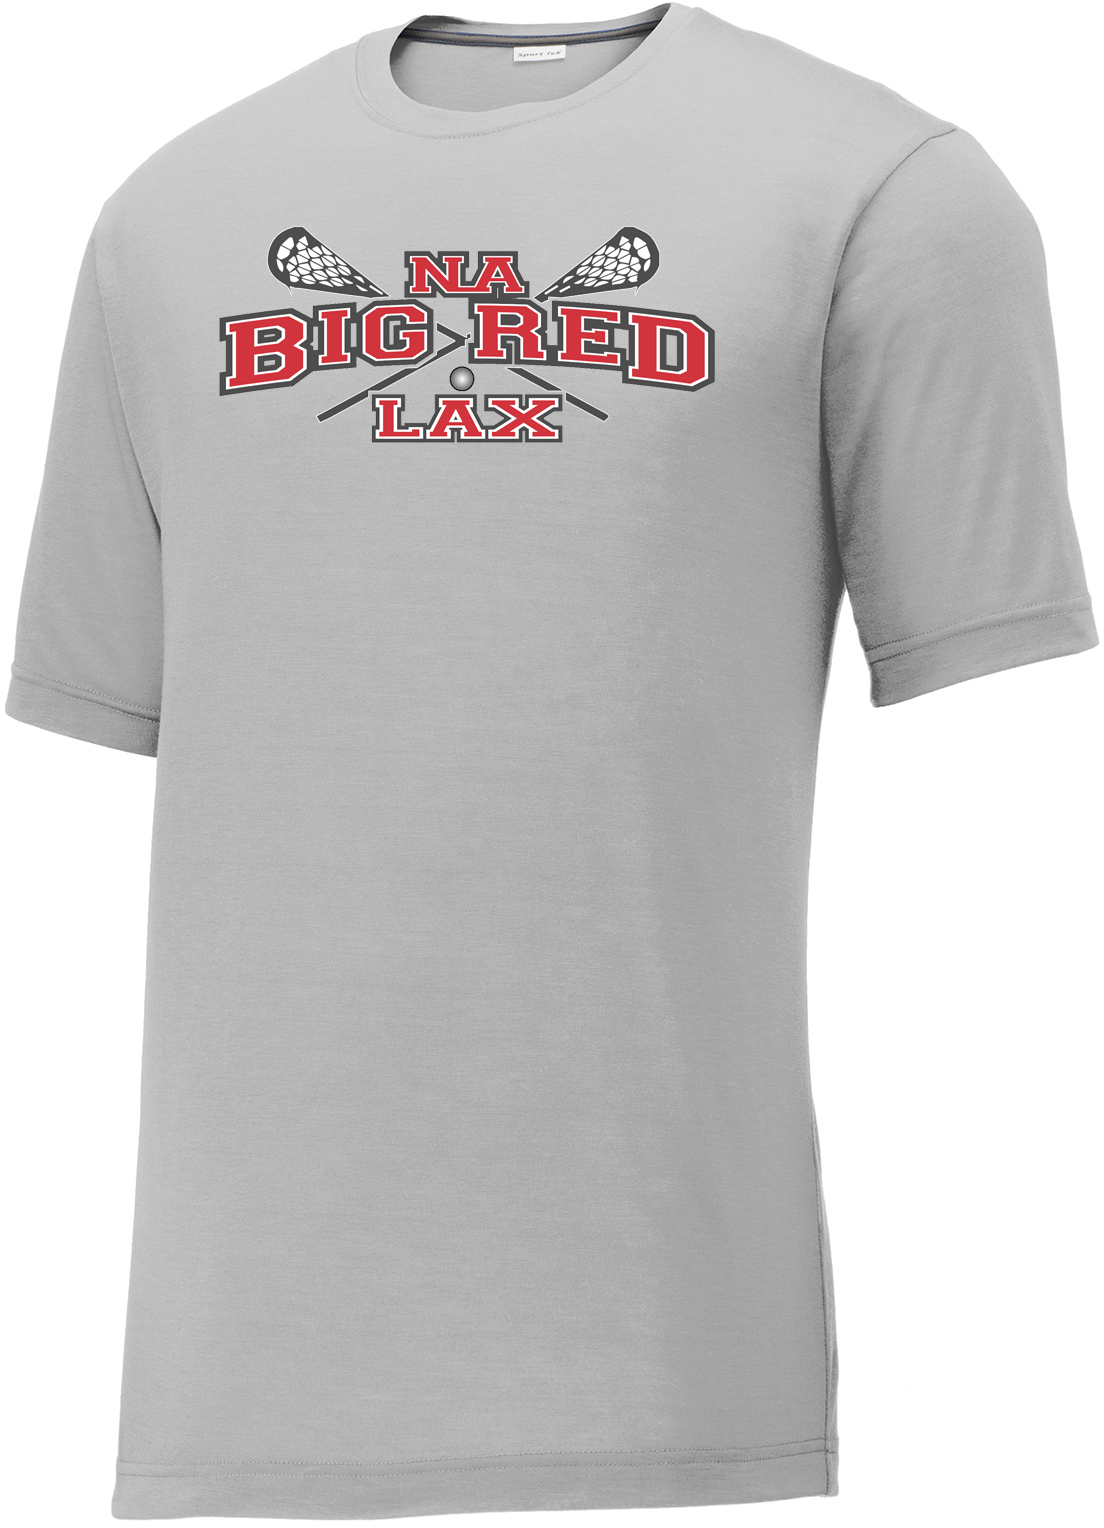 NA Big Red Lax Men's Silver CottonTouch Performance T-Shirt